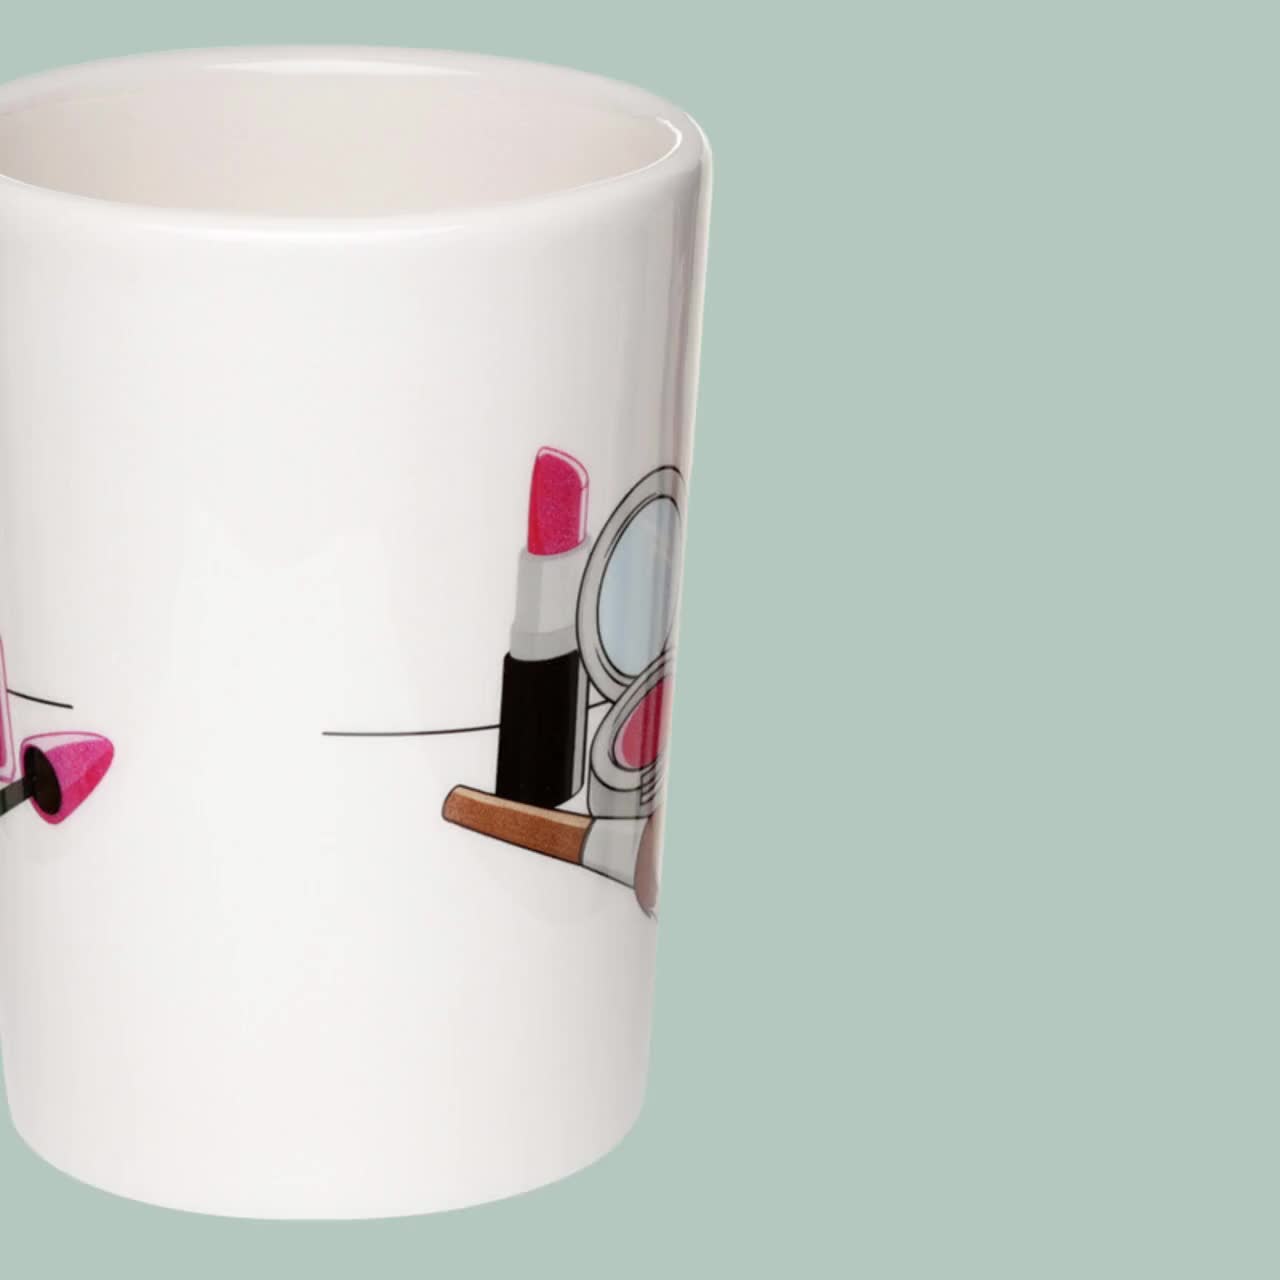 Items under 3 Dollars Cup Fade And Lipstick India